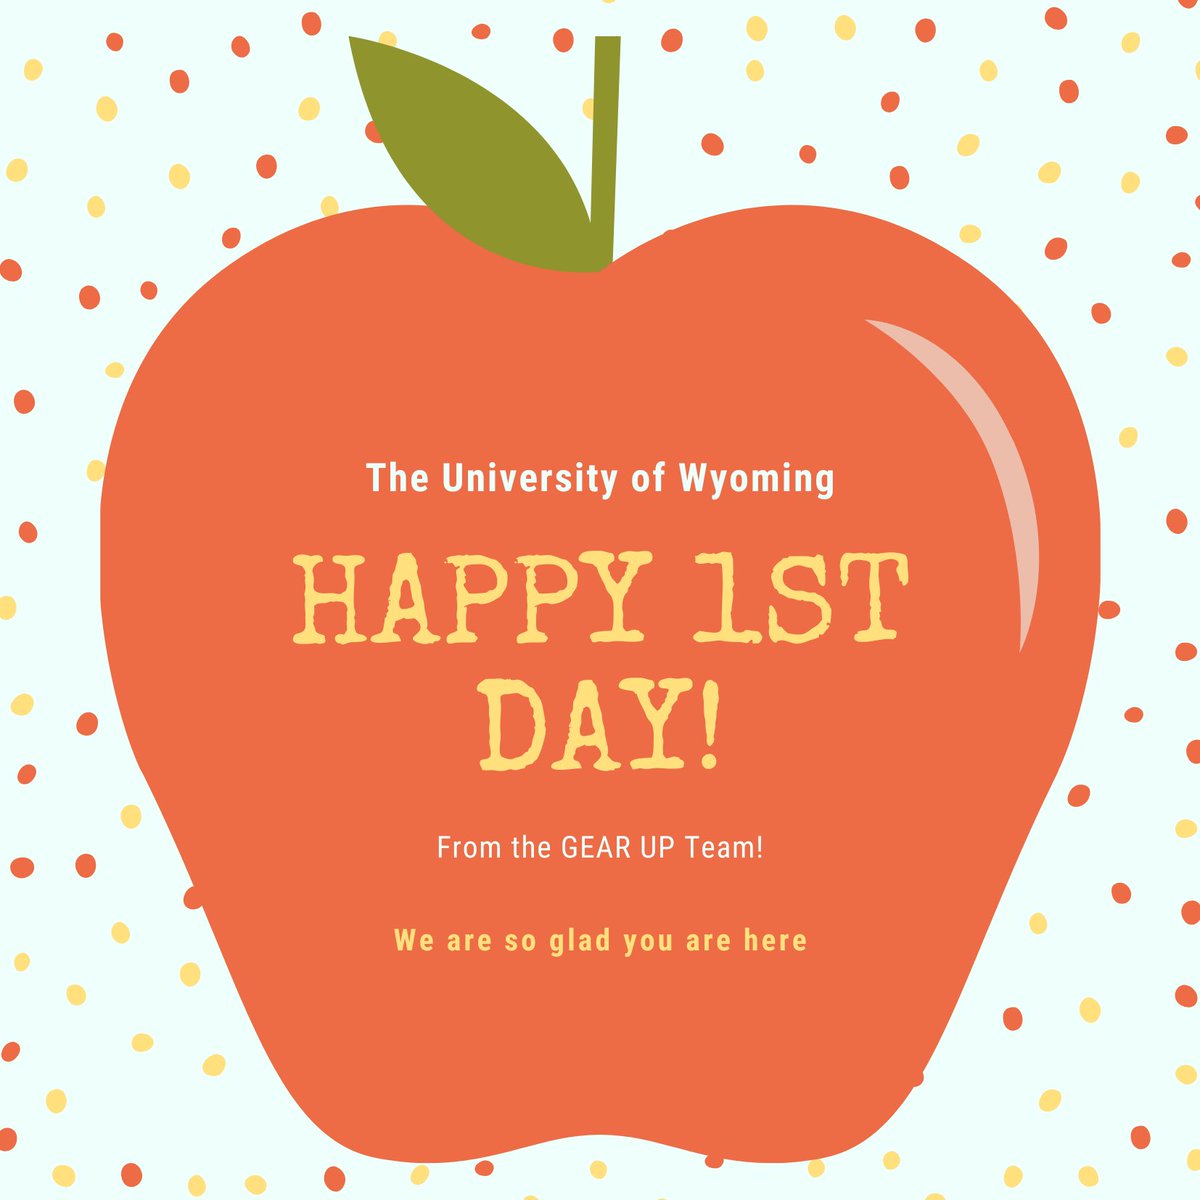 Welcome and welcome back! We are so glad you made The University of Wyoming your home! Stop by our GEAR UP office in Knight Hall on the 3rd floor if you need anything! Make it a great year Pokes!!